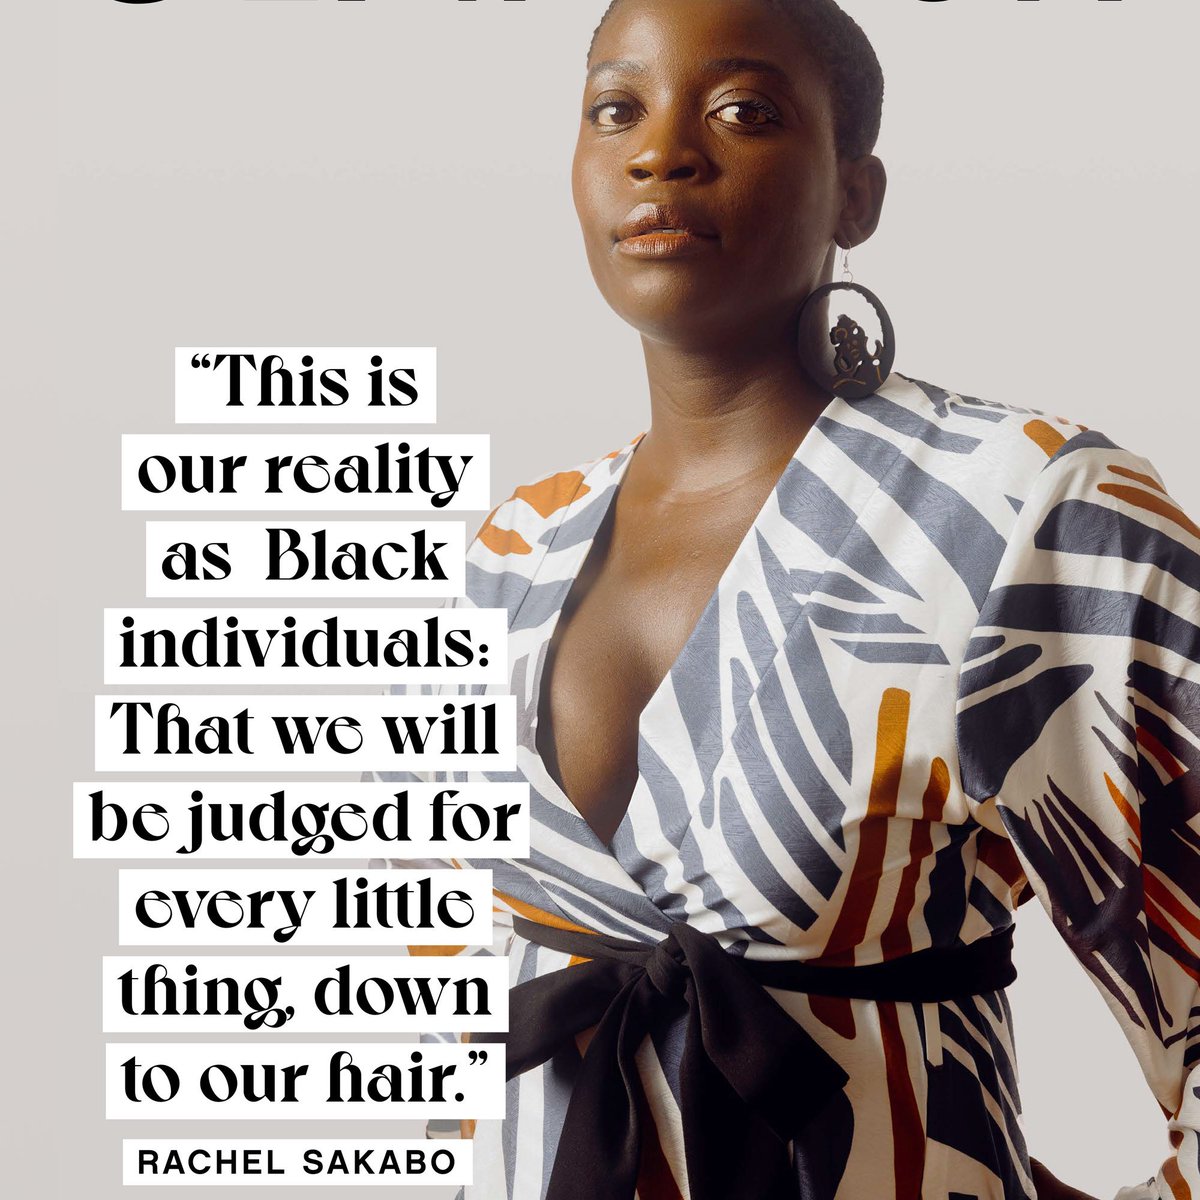 "This is our reality as Black individuals: That we will be judged for every little thing, down to our hair. " -Rachel Sakabo  http://glmr.co/C32QPI9   #OurHairIssue